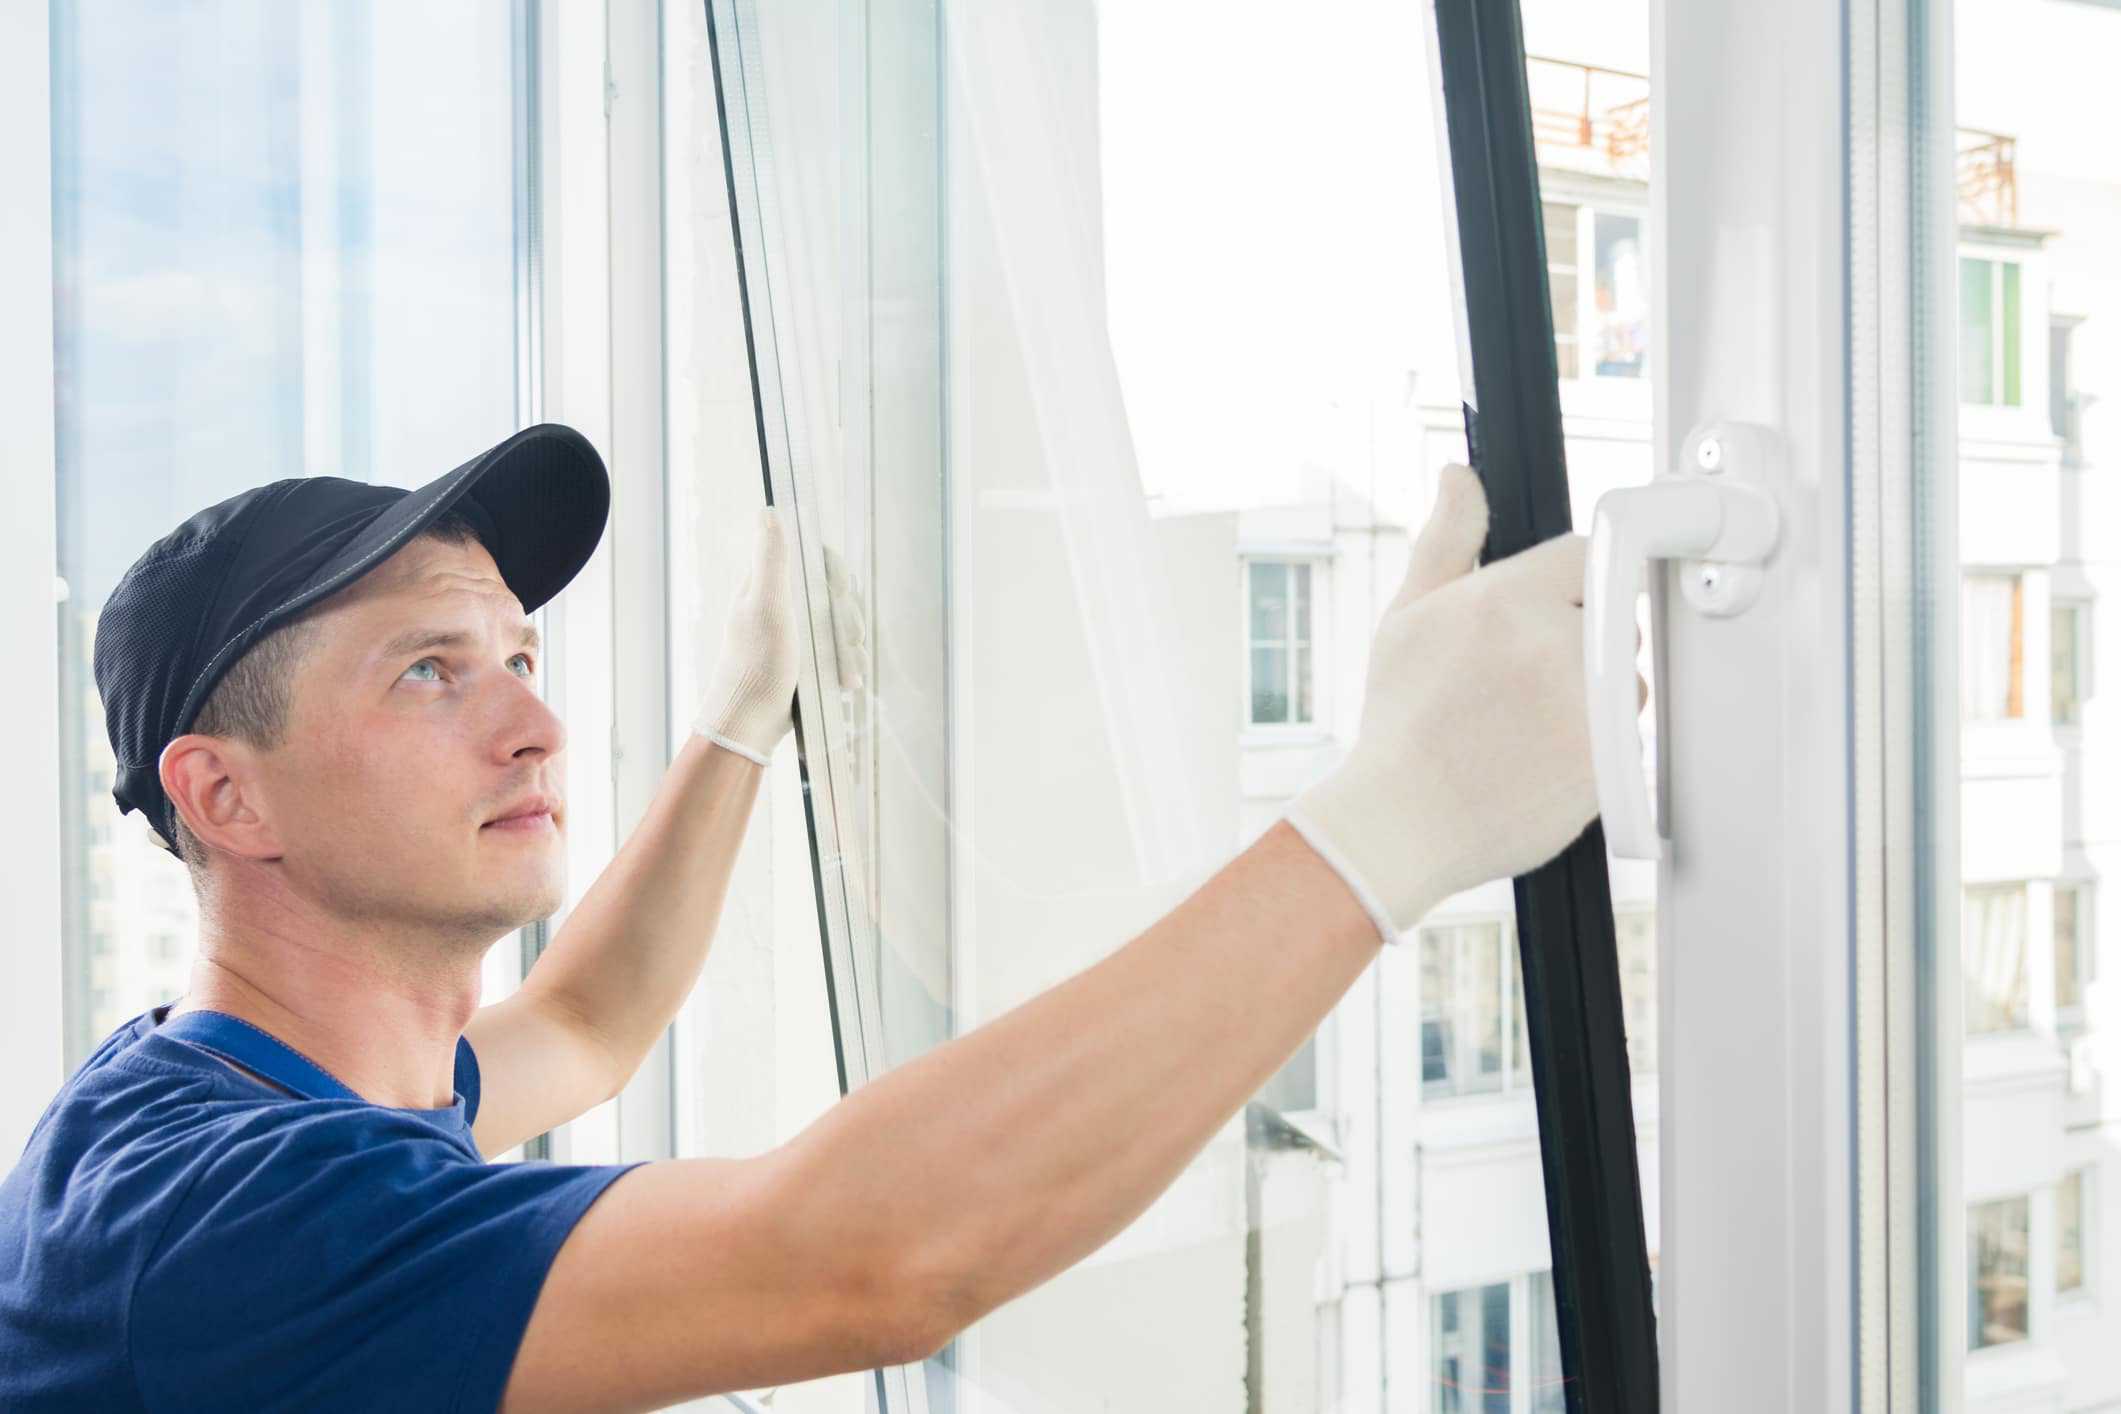 Starting a Glazier Business: Essential Considerations